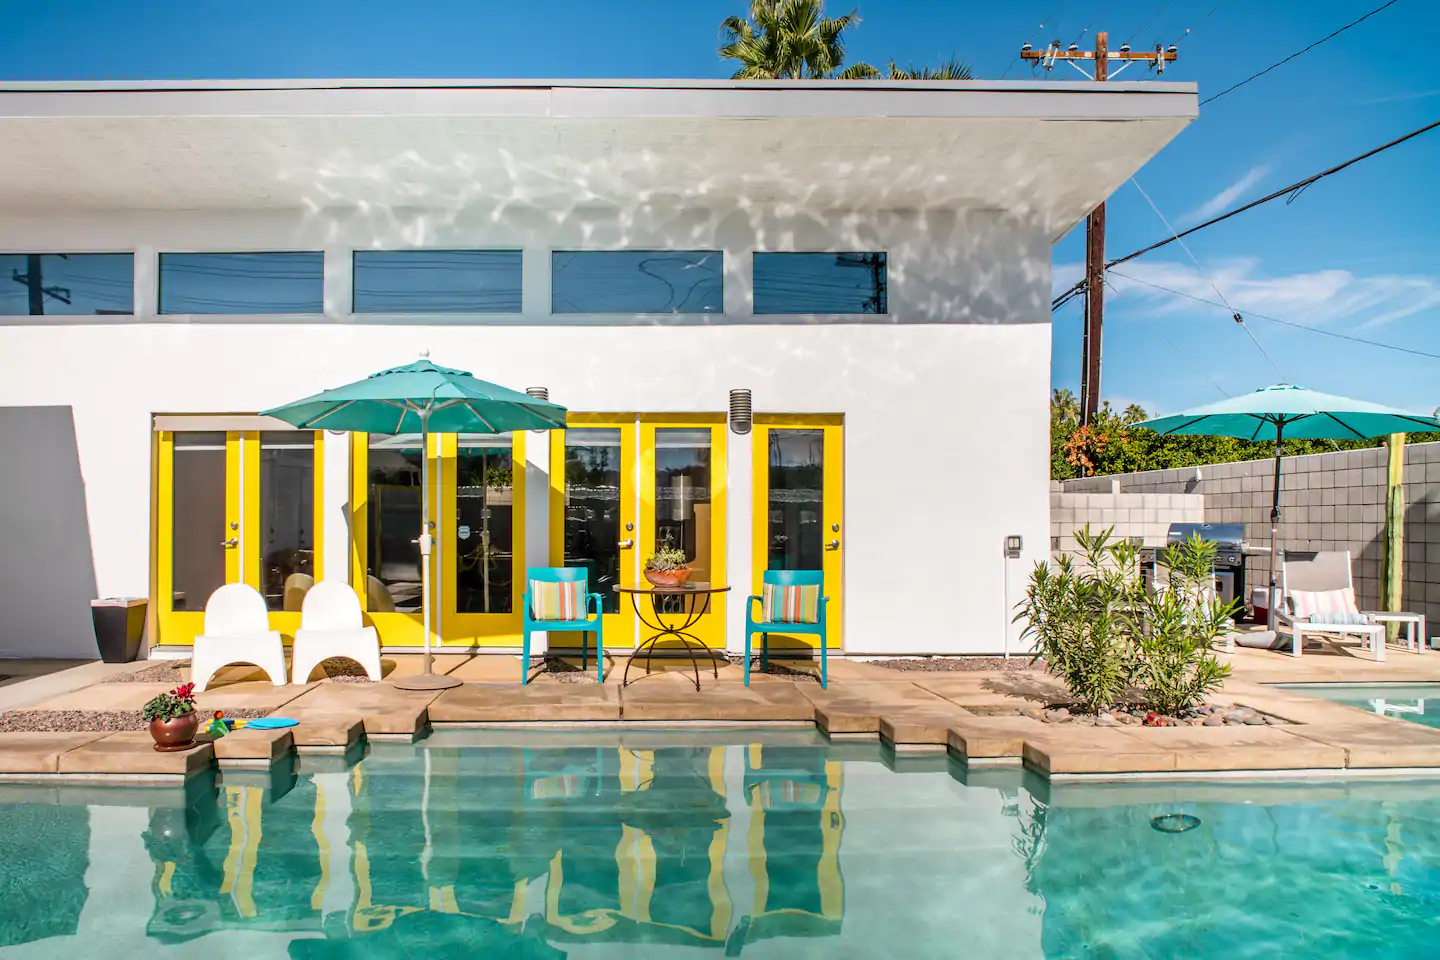 Stunning California Airbnb with bright yellow doors, a huge pool, gorgeous patio area, in Palm Springs.